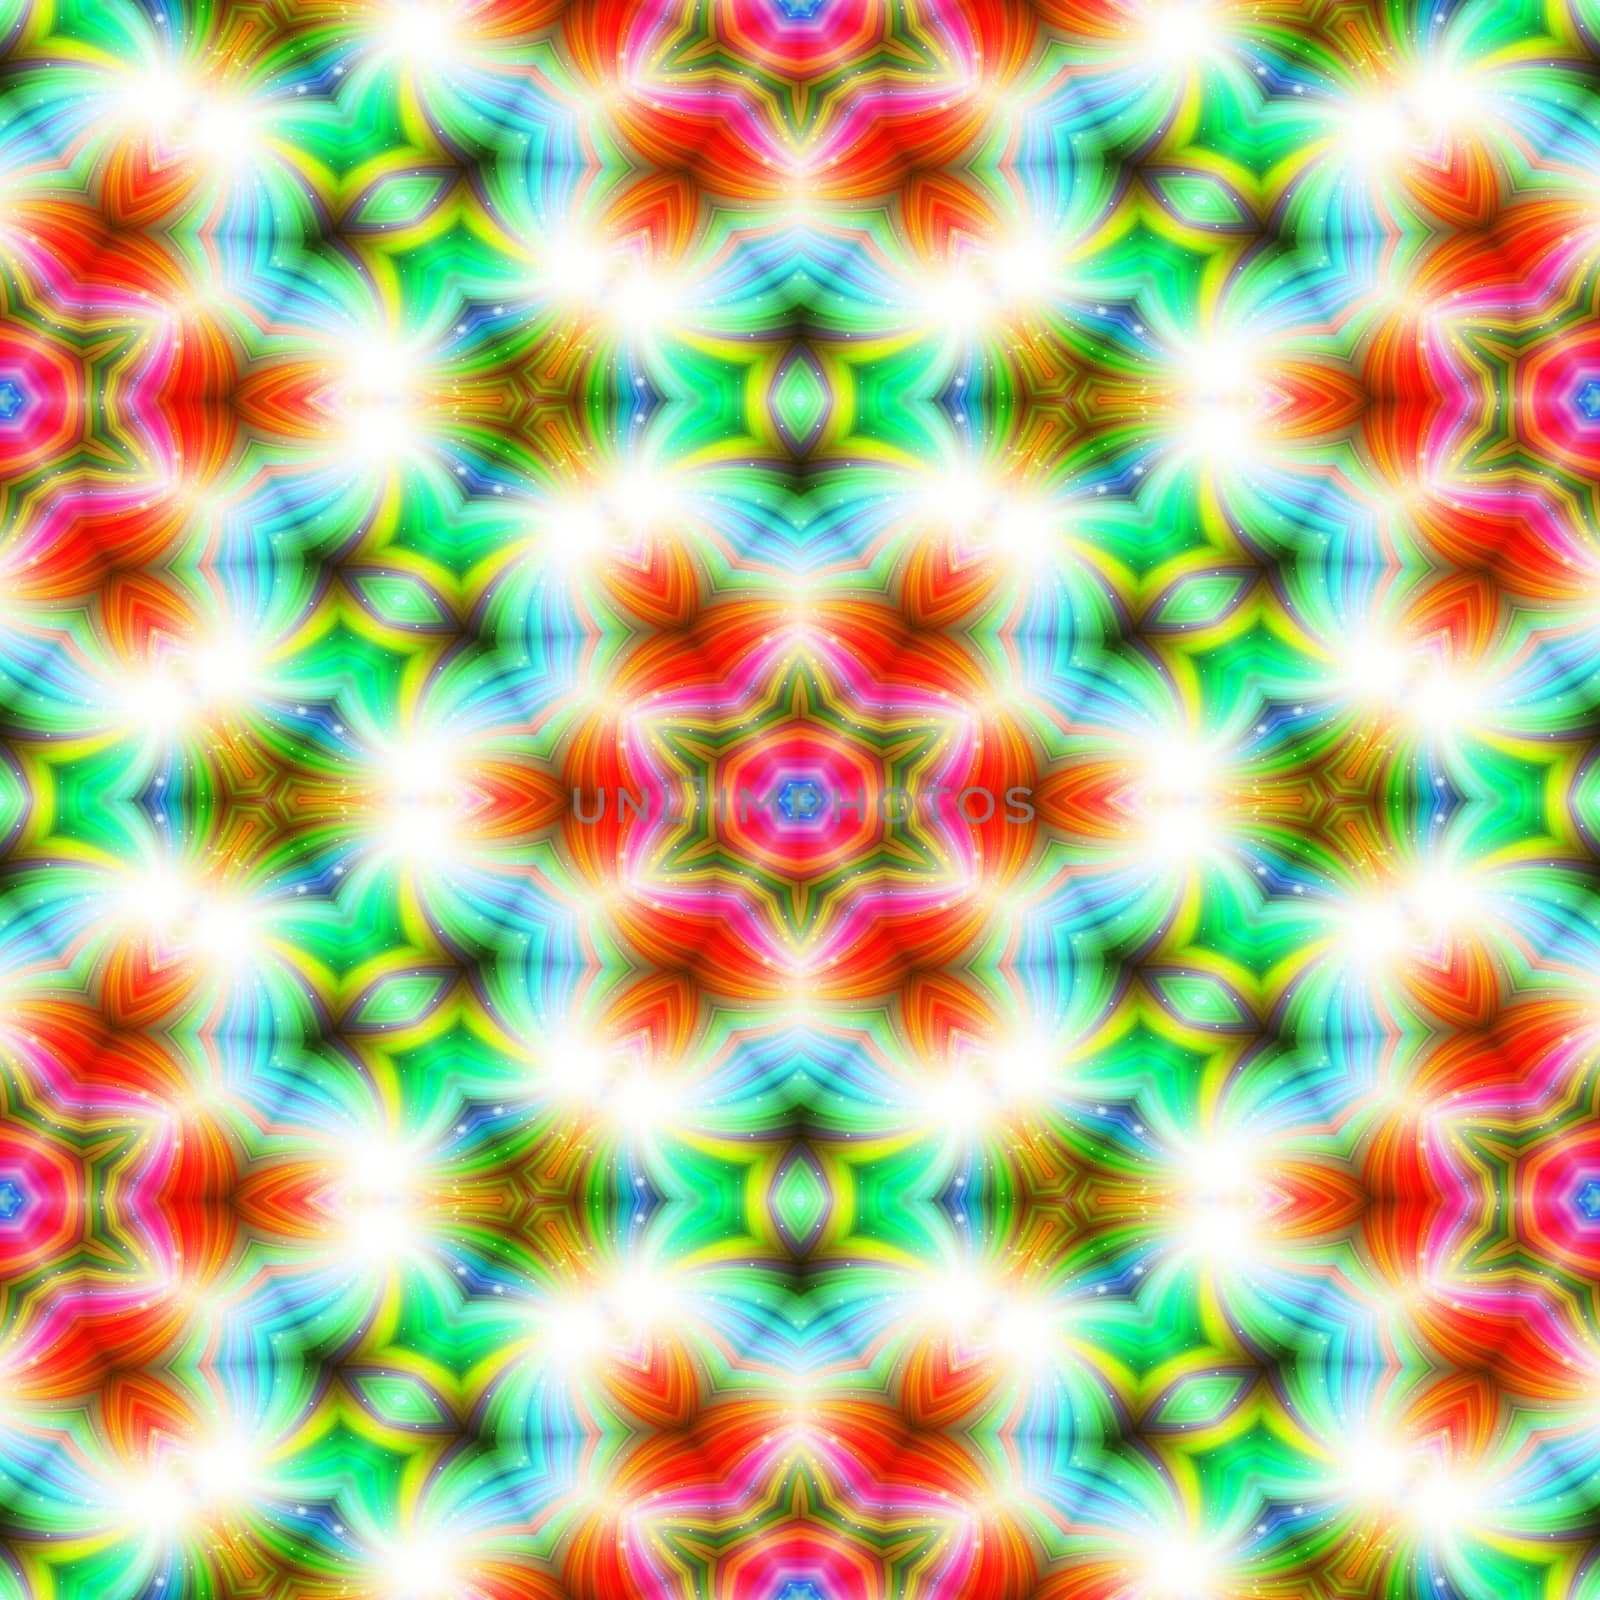 Kaleidoscope seamless abstract colorful background with star shape.